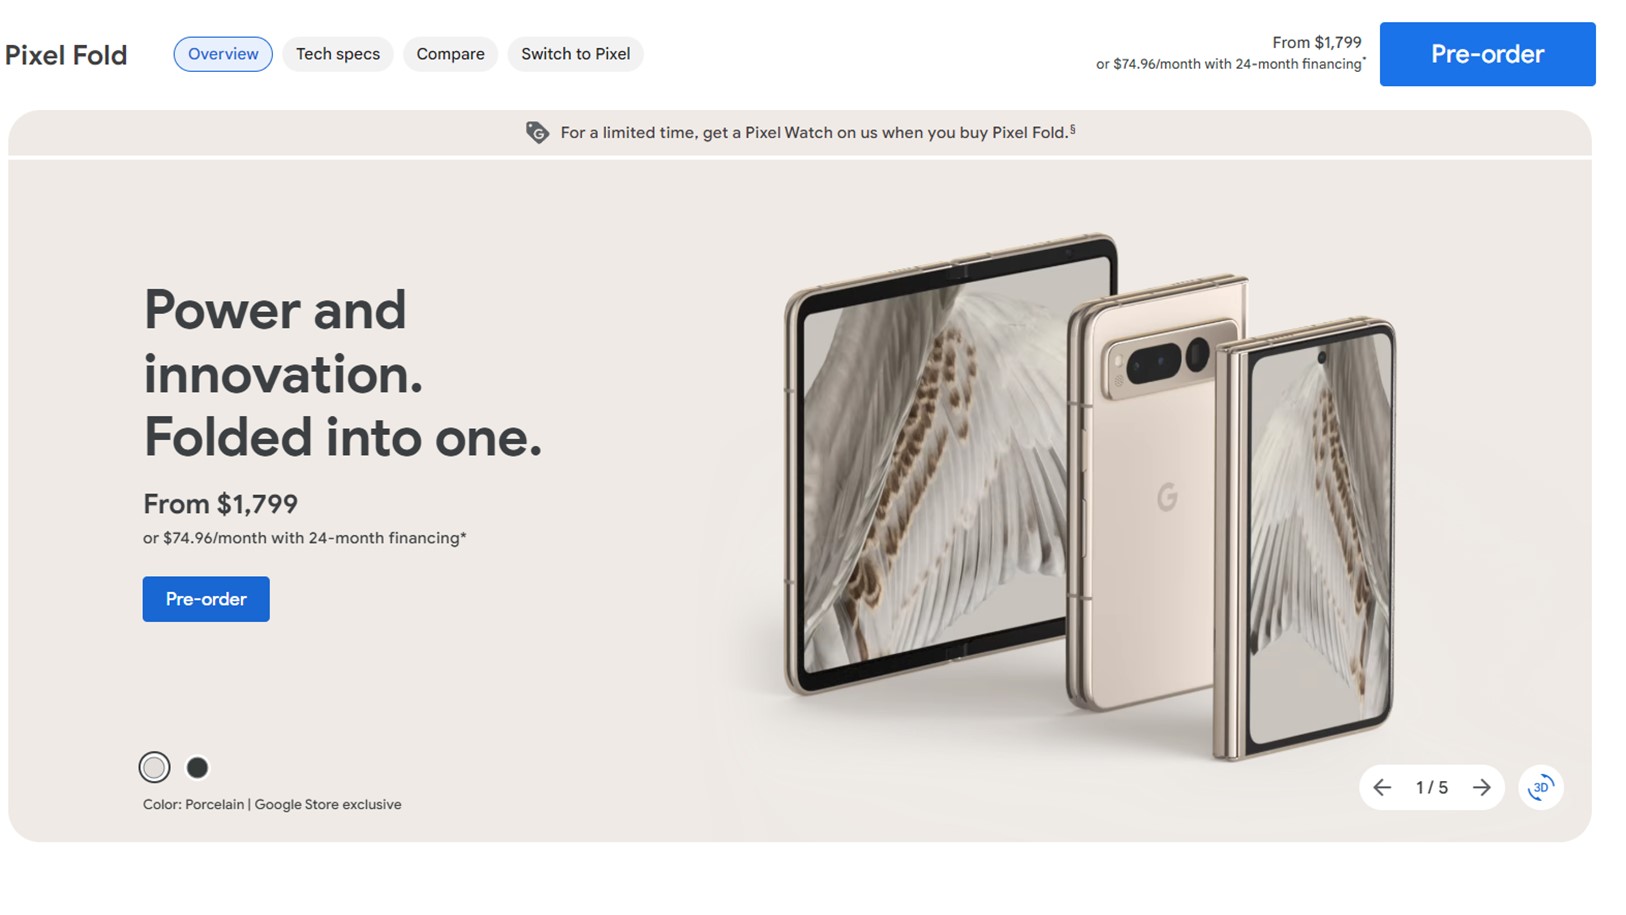 Google Pixel Fold Product Page